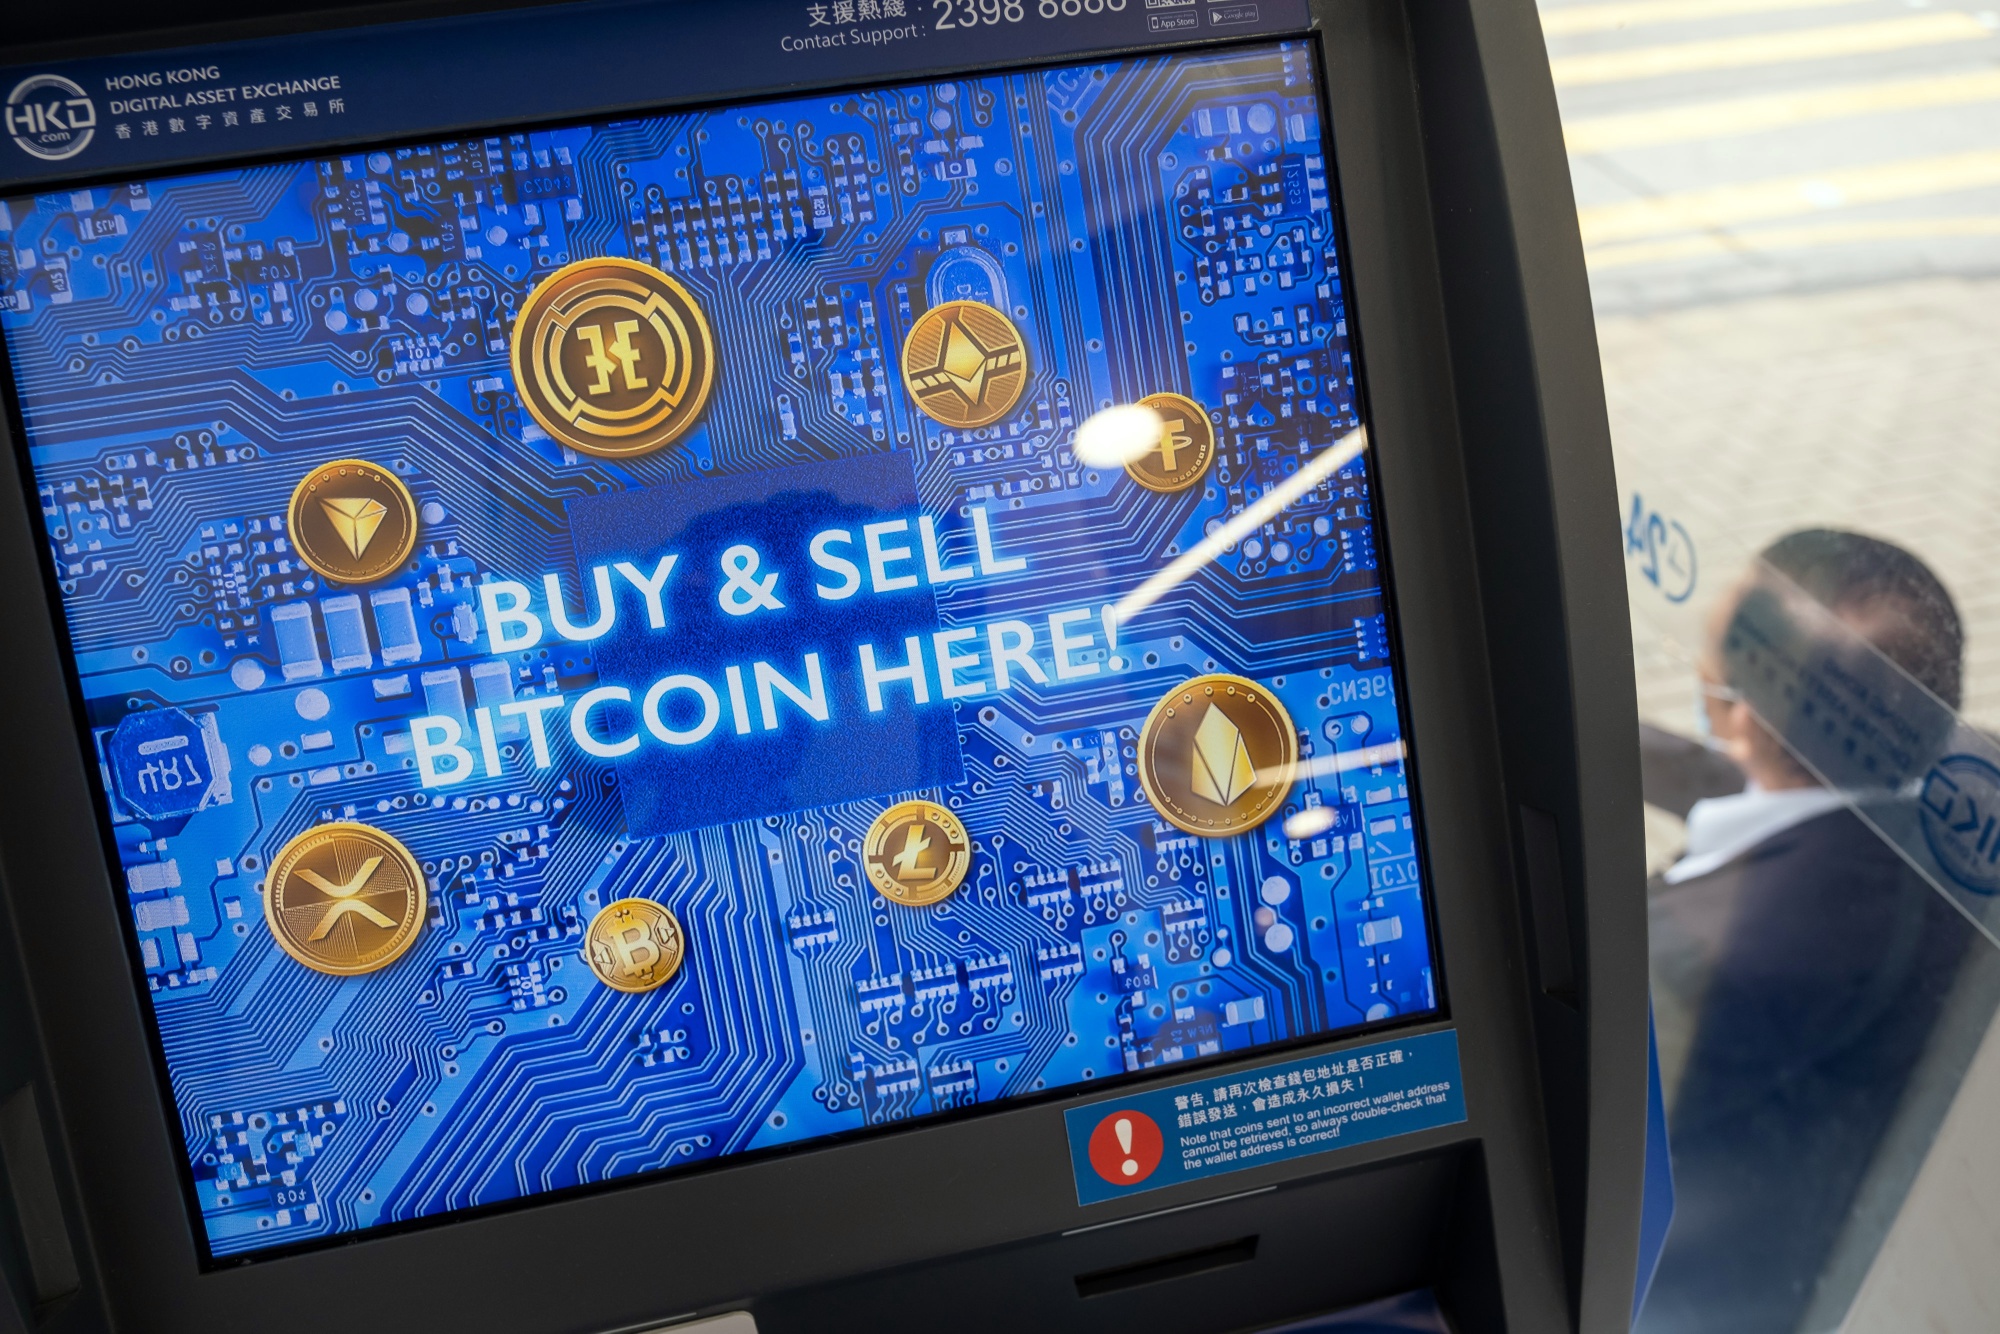 Inside Hong Kong Digital Asset Exchange's Cryptocurrency Trading Store